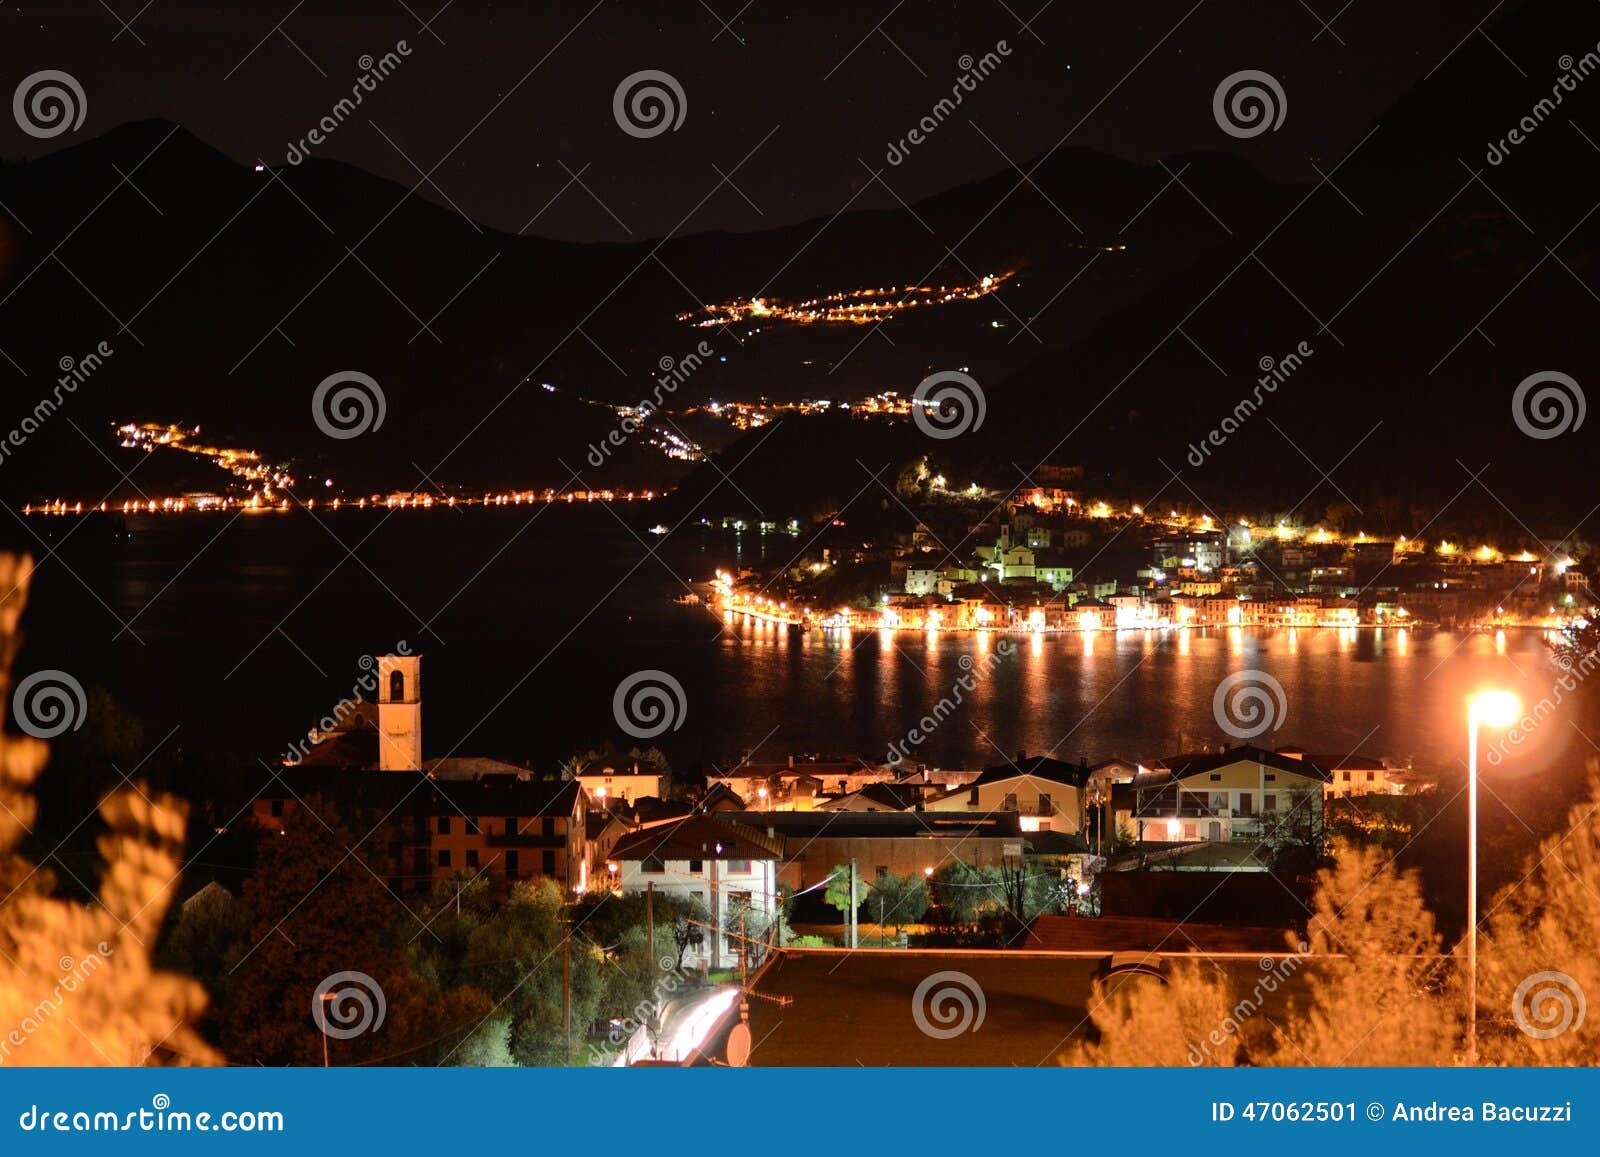 night view of lake iseo, lombardy, italy